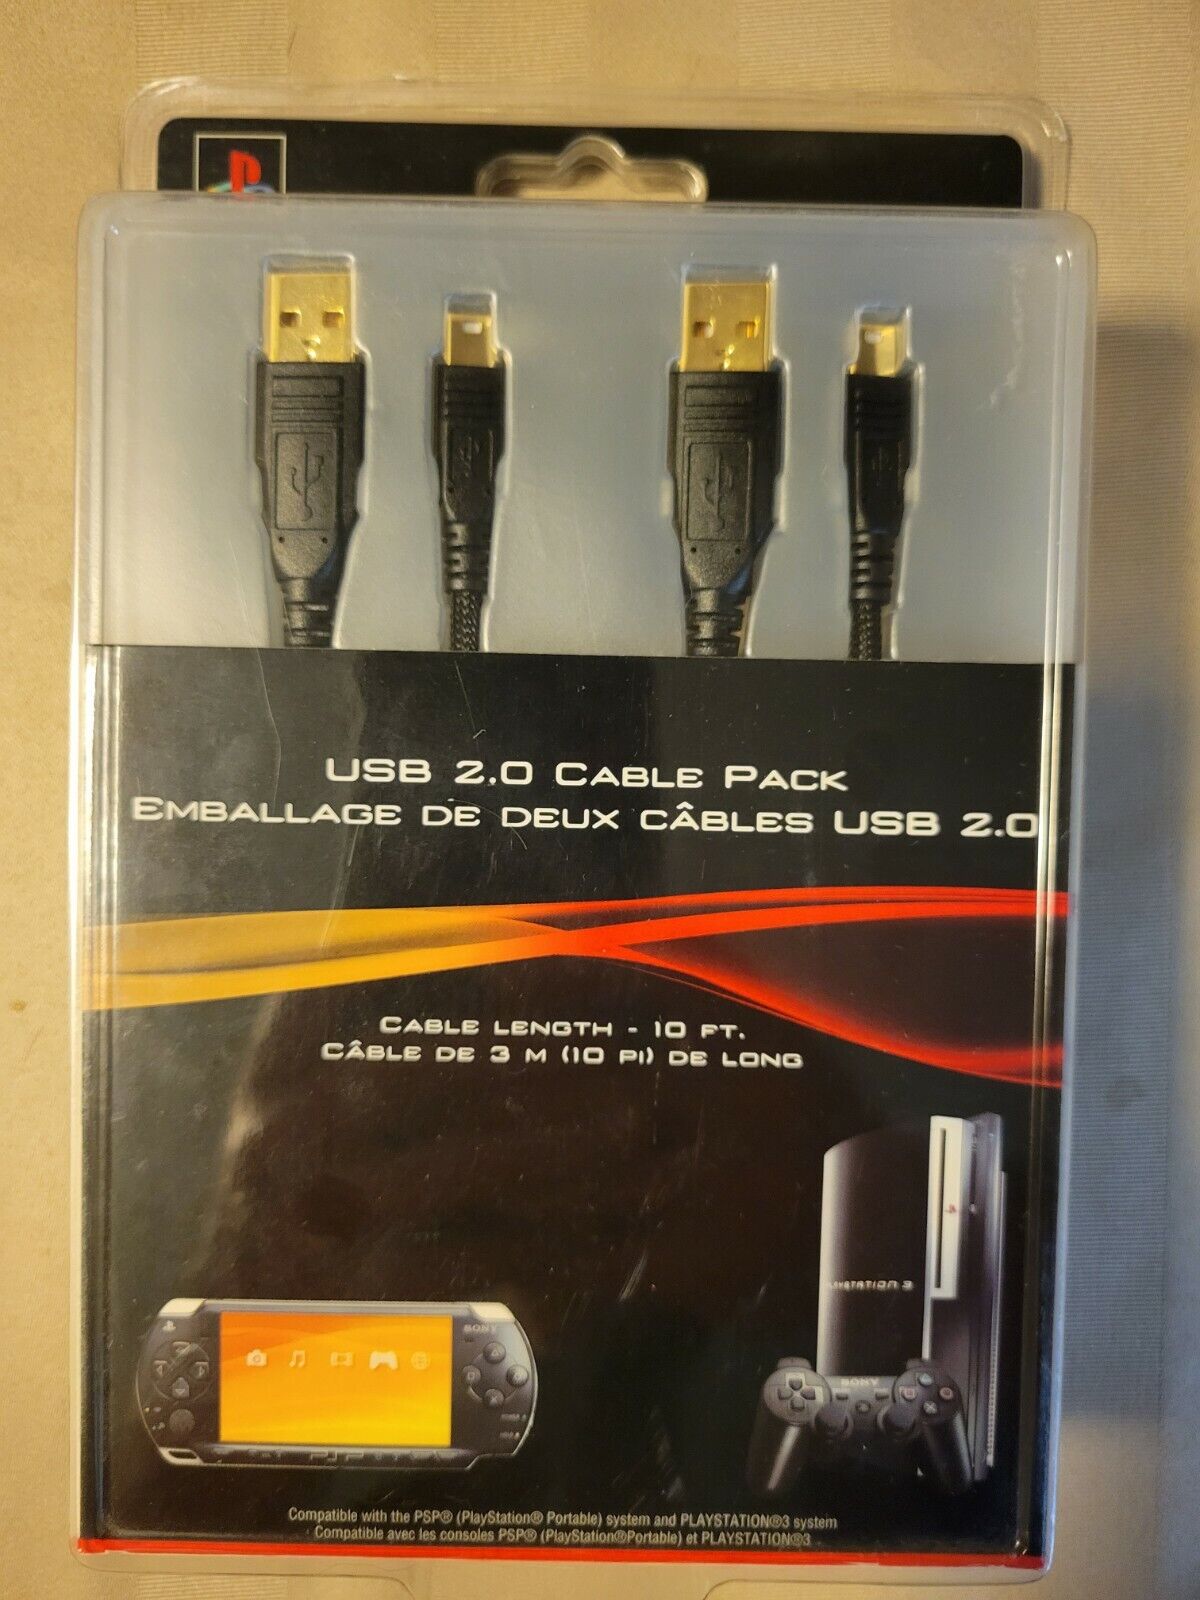 Sony Playstation 2 3 4 psp vita 超ポイントアップ祭 記念日 USB plated Gold pack long 10 ft cable